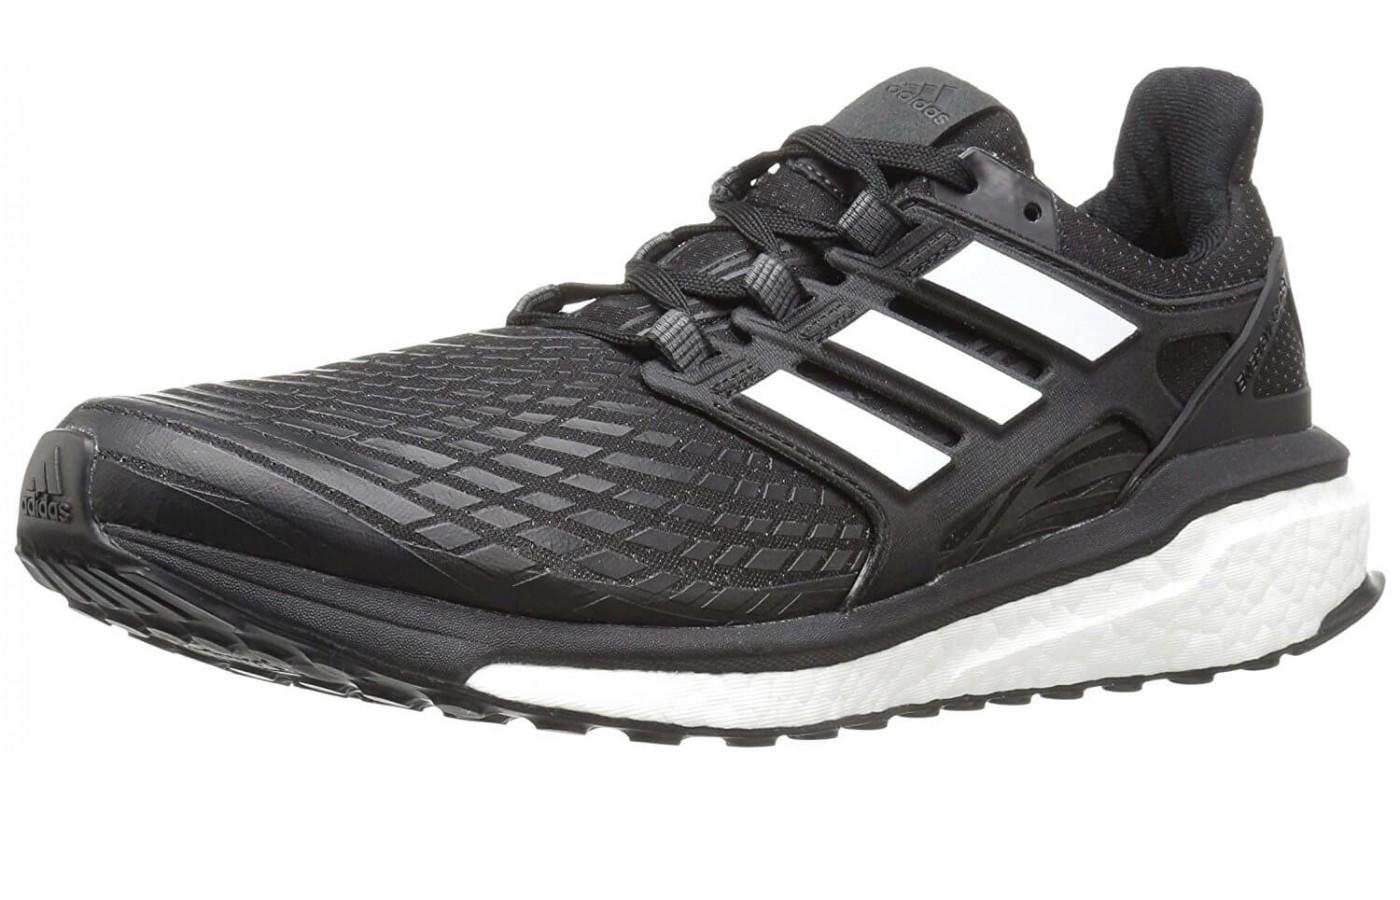 Adidas Energy Boost shown from the front/side